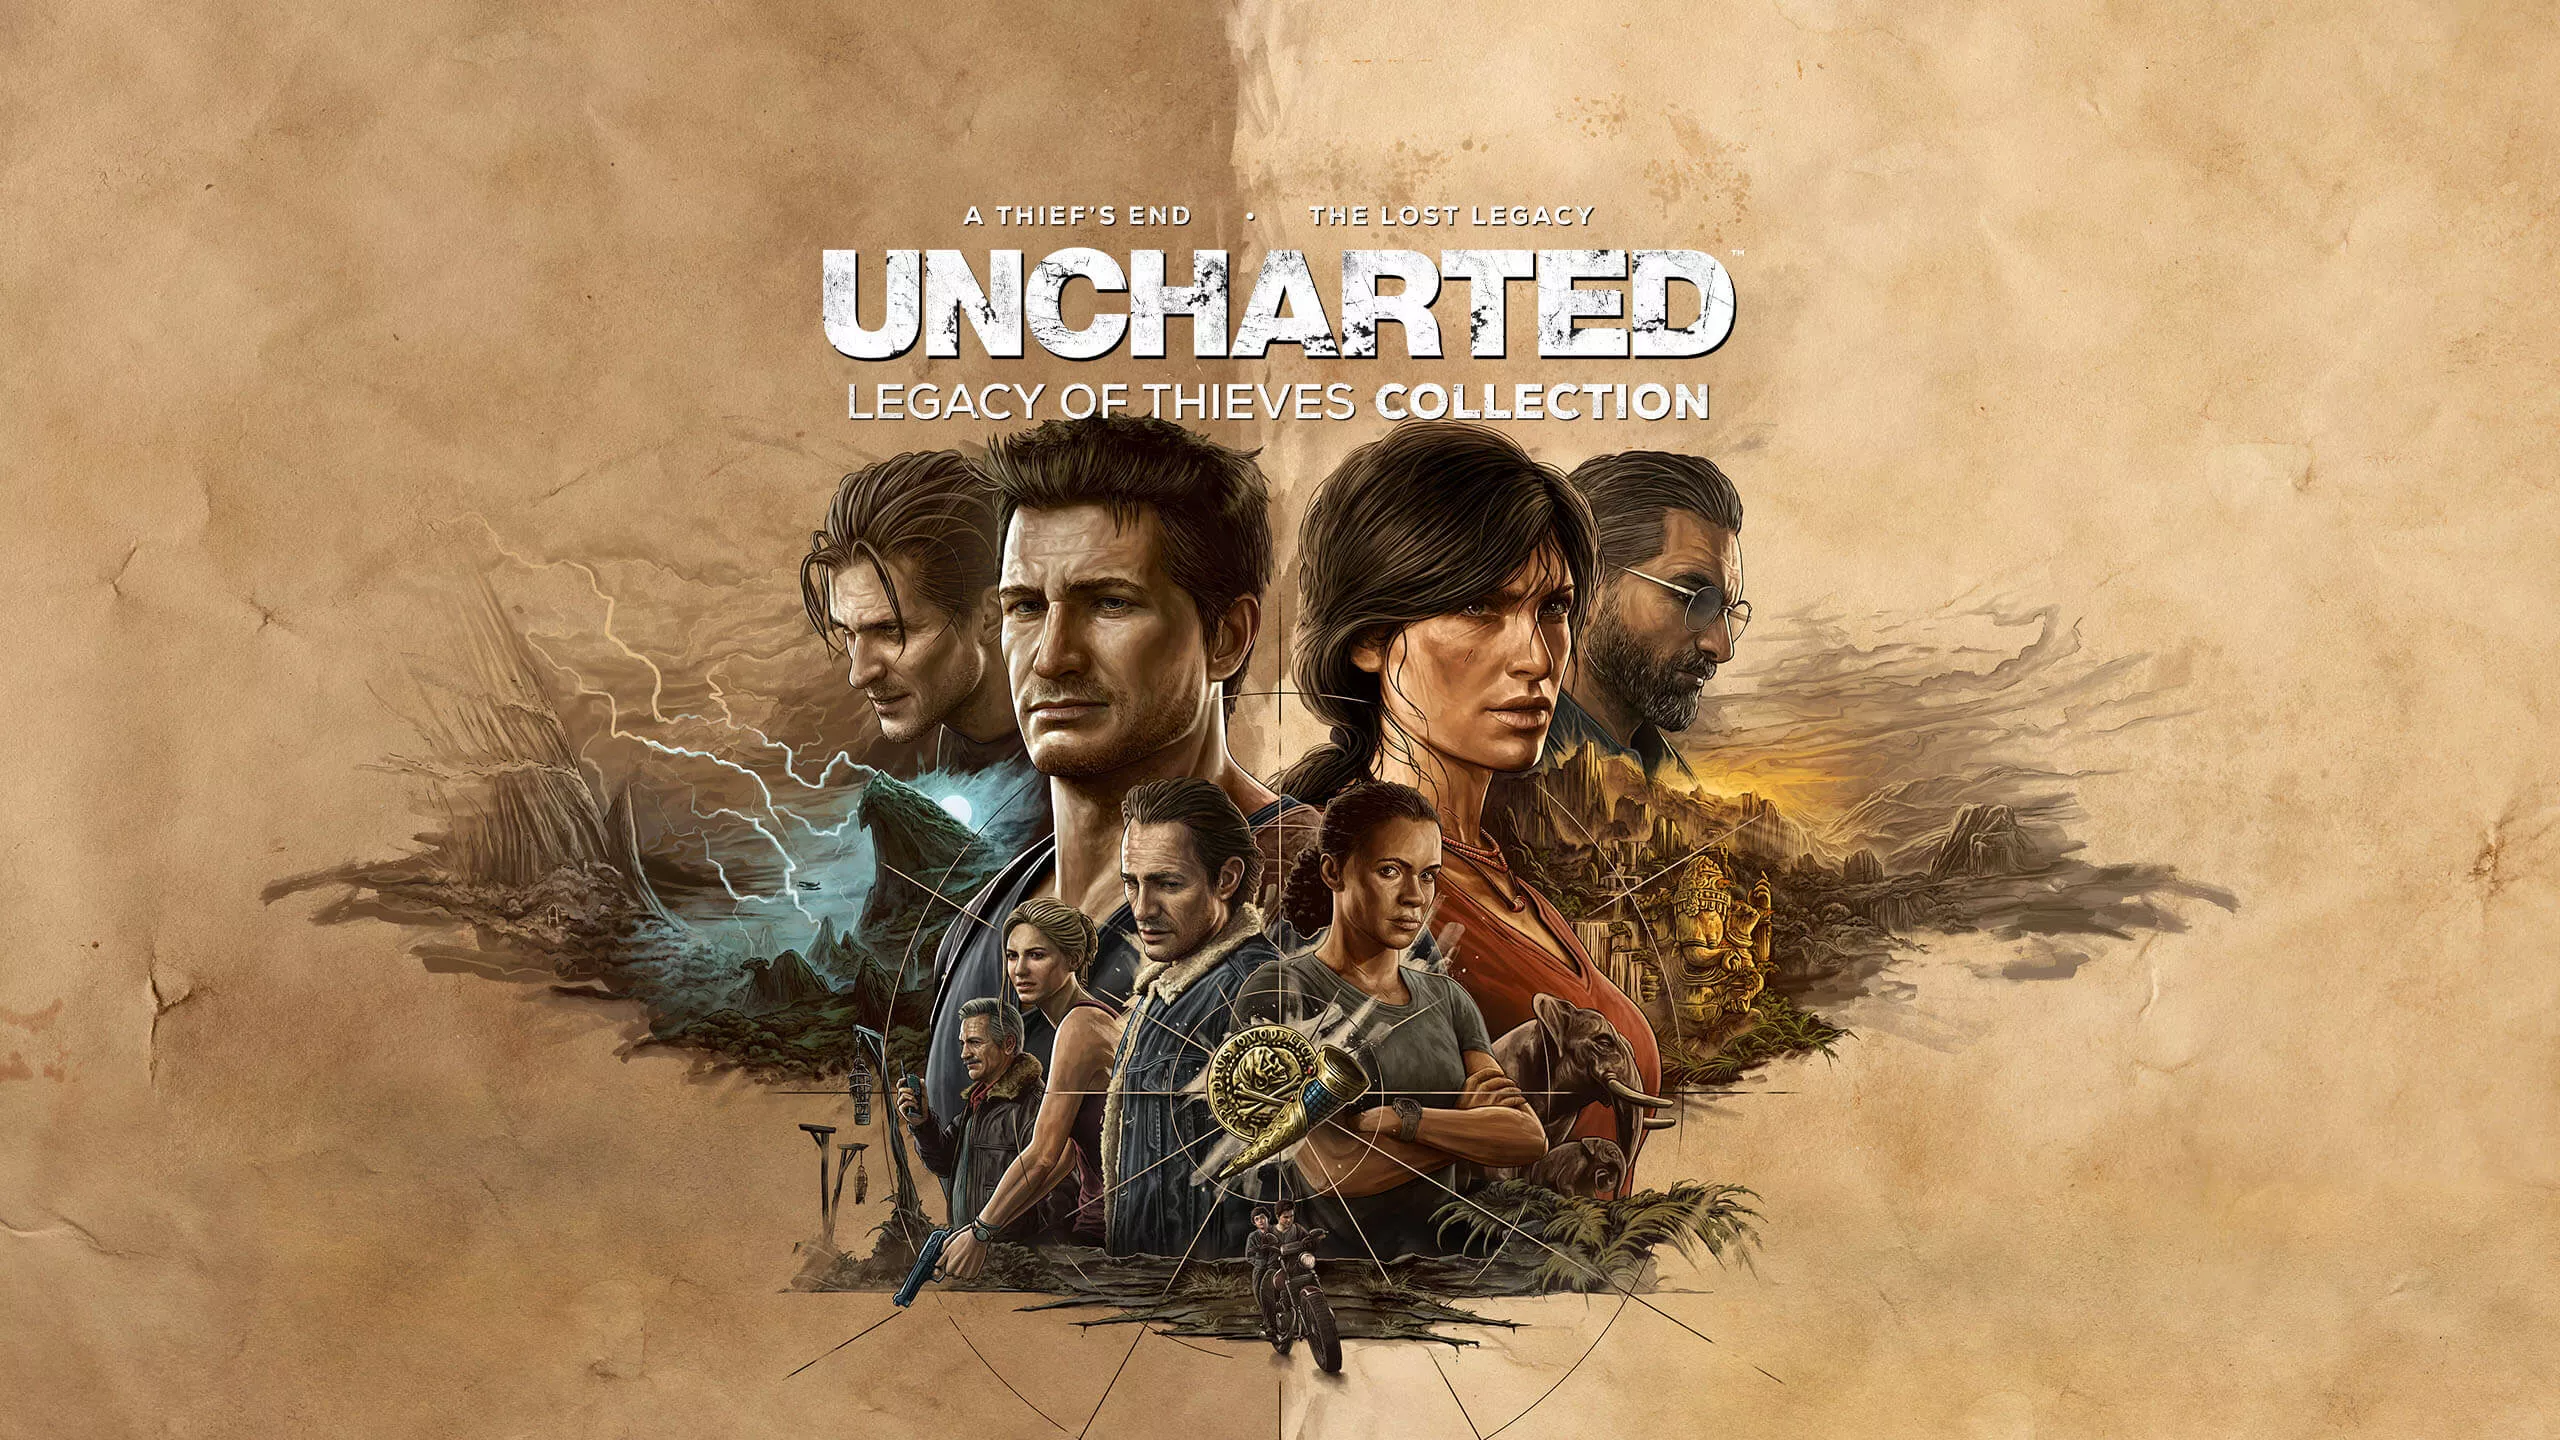 Uncharted: Legacy of Thieves Collection erscheint am 28. Januar Heropic